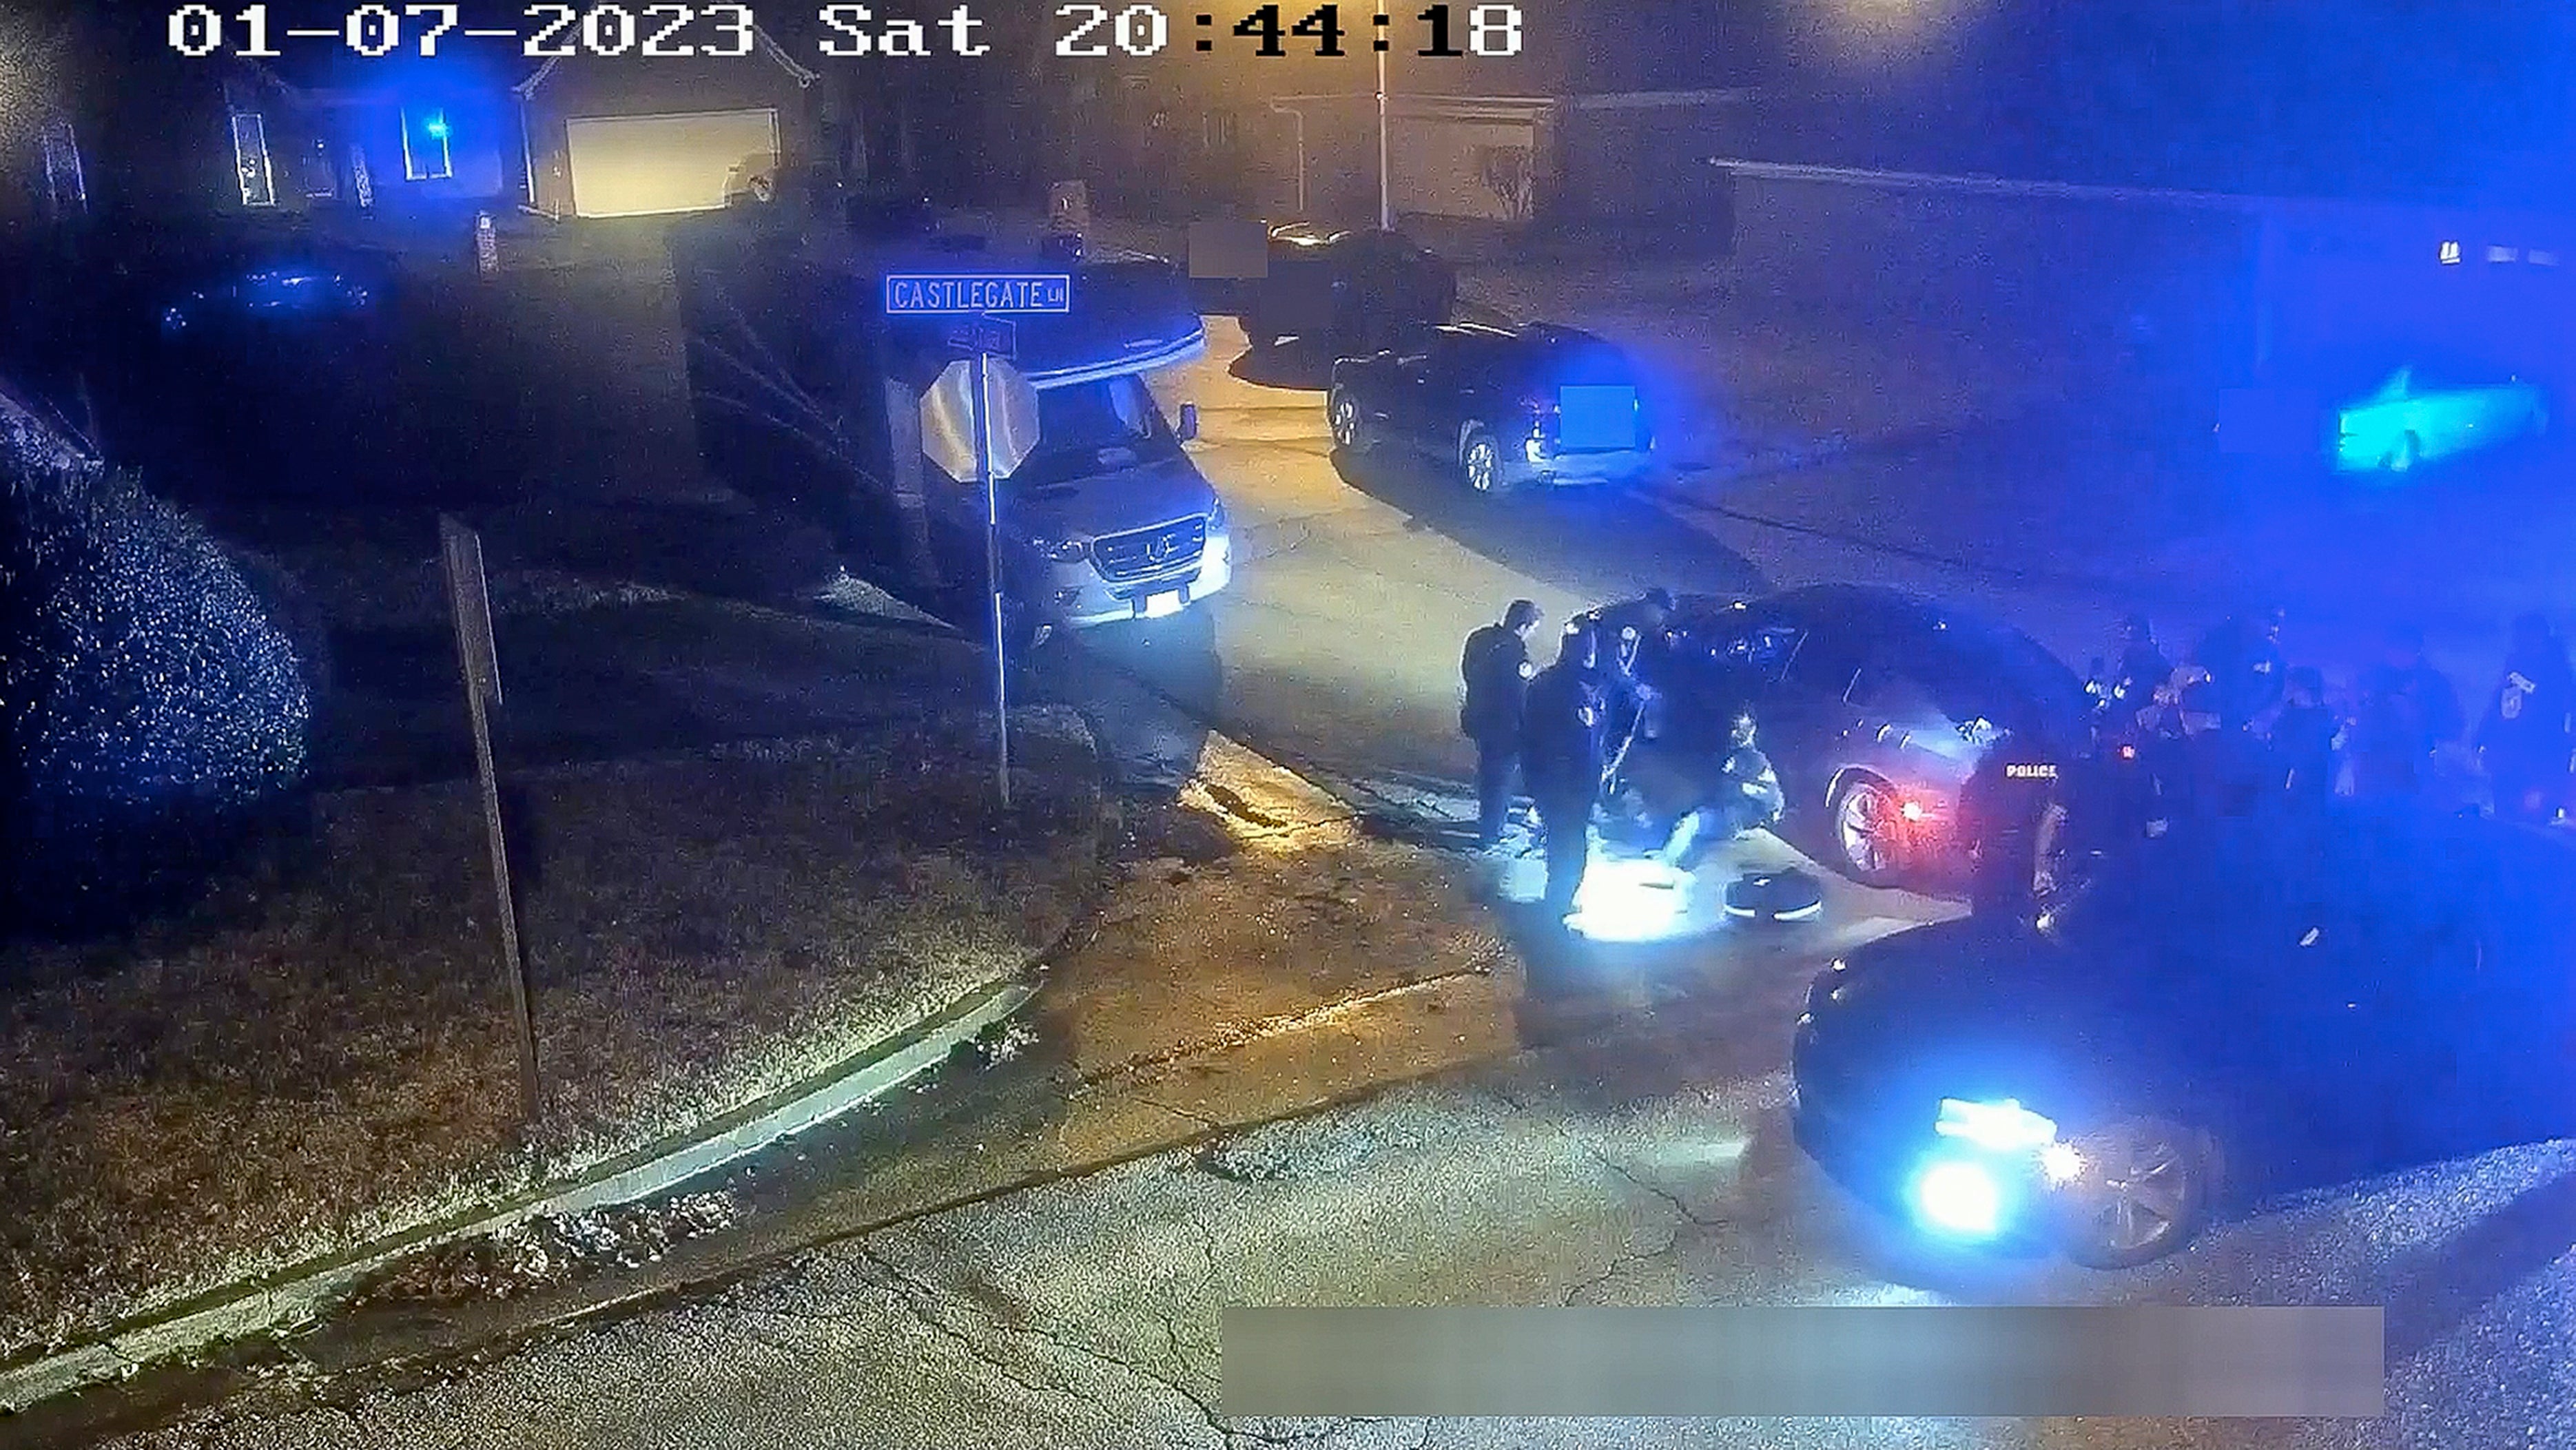 Pole camera footage shows the officers beating Tyre Nichols